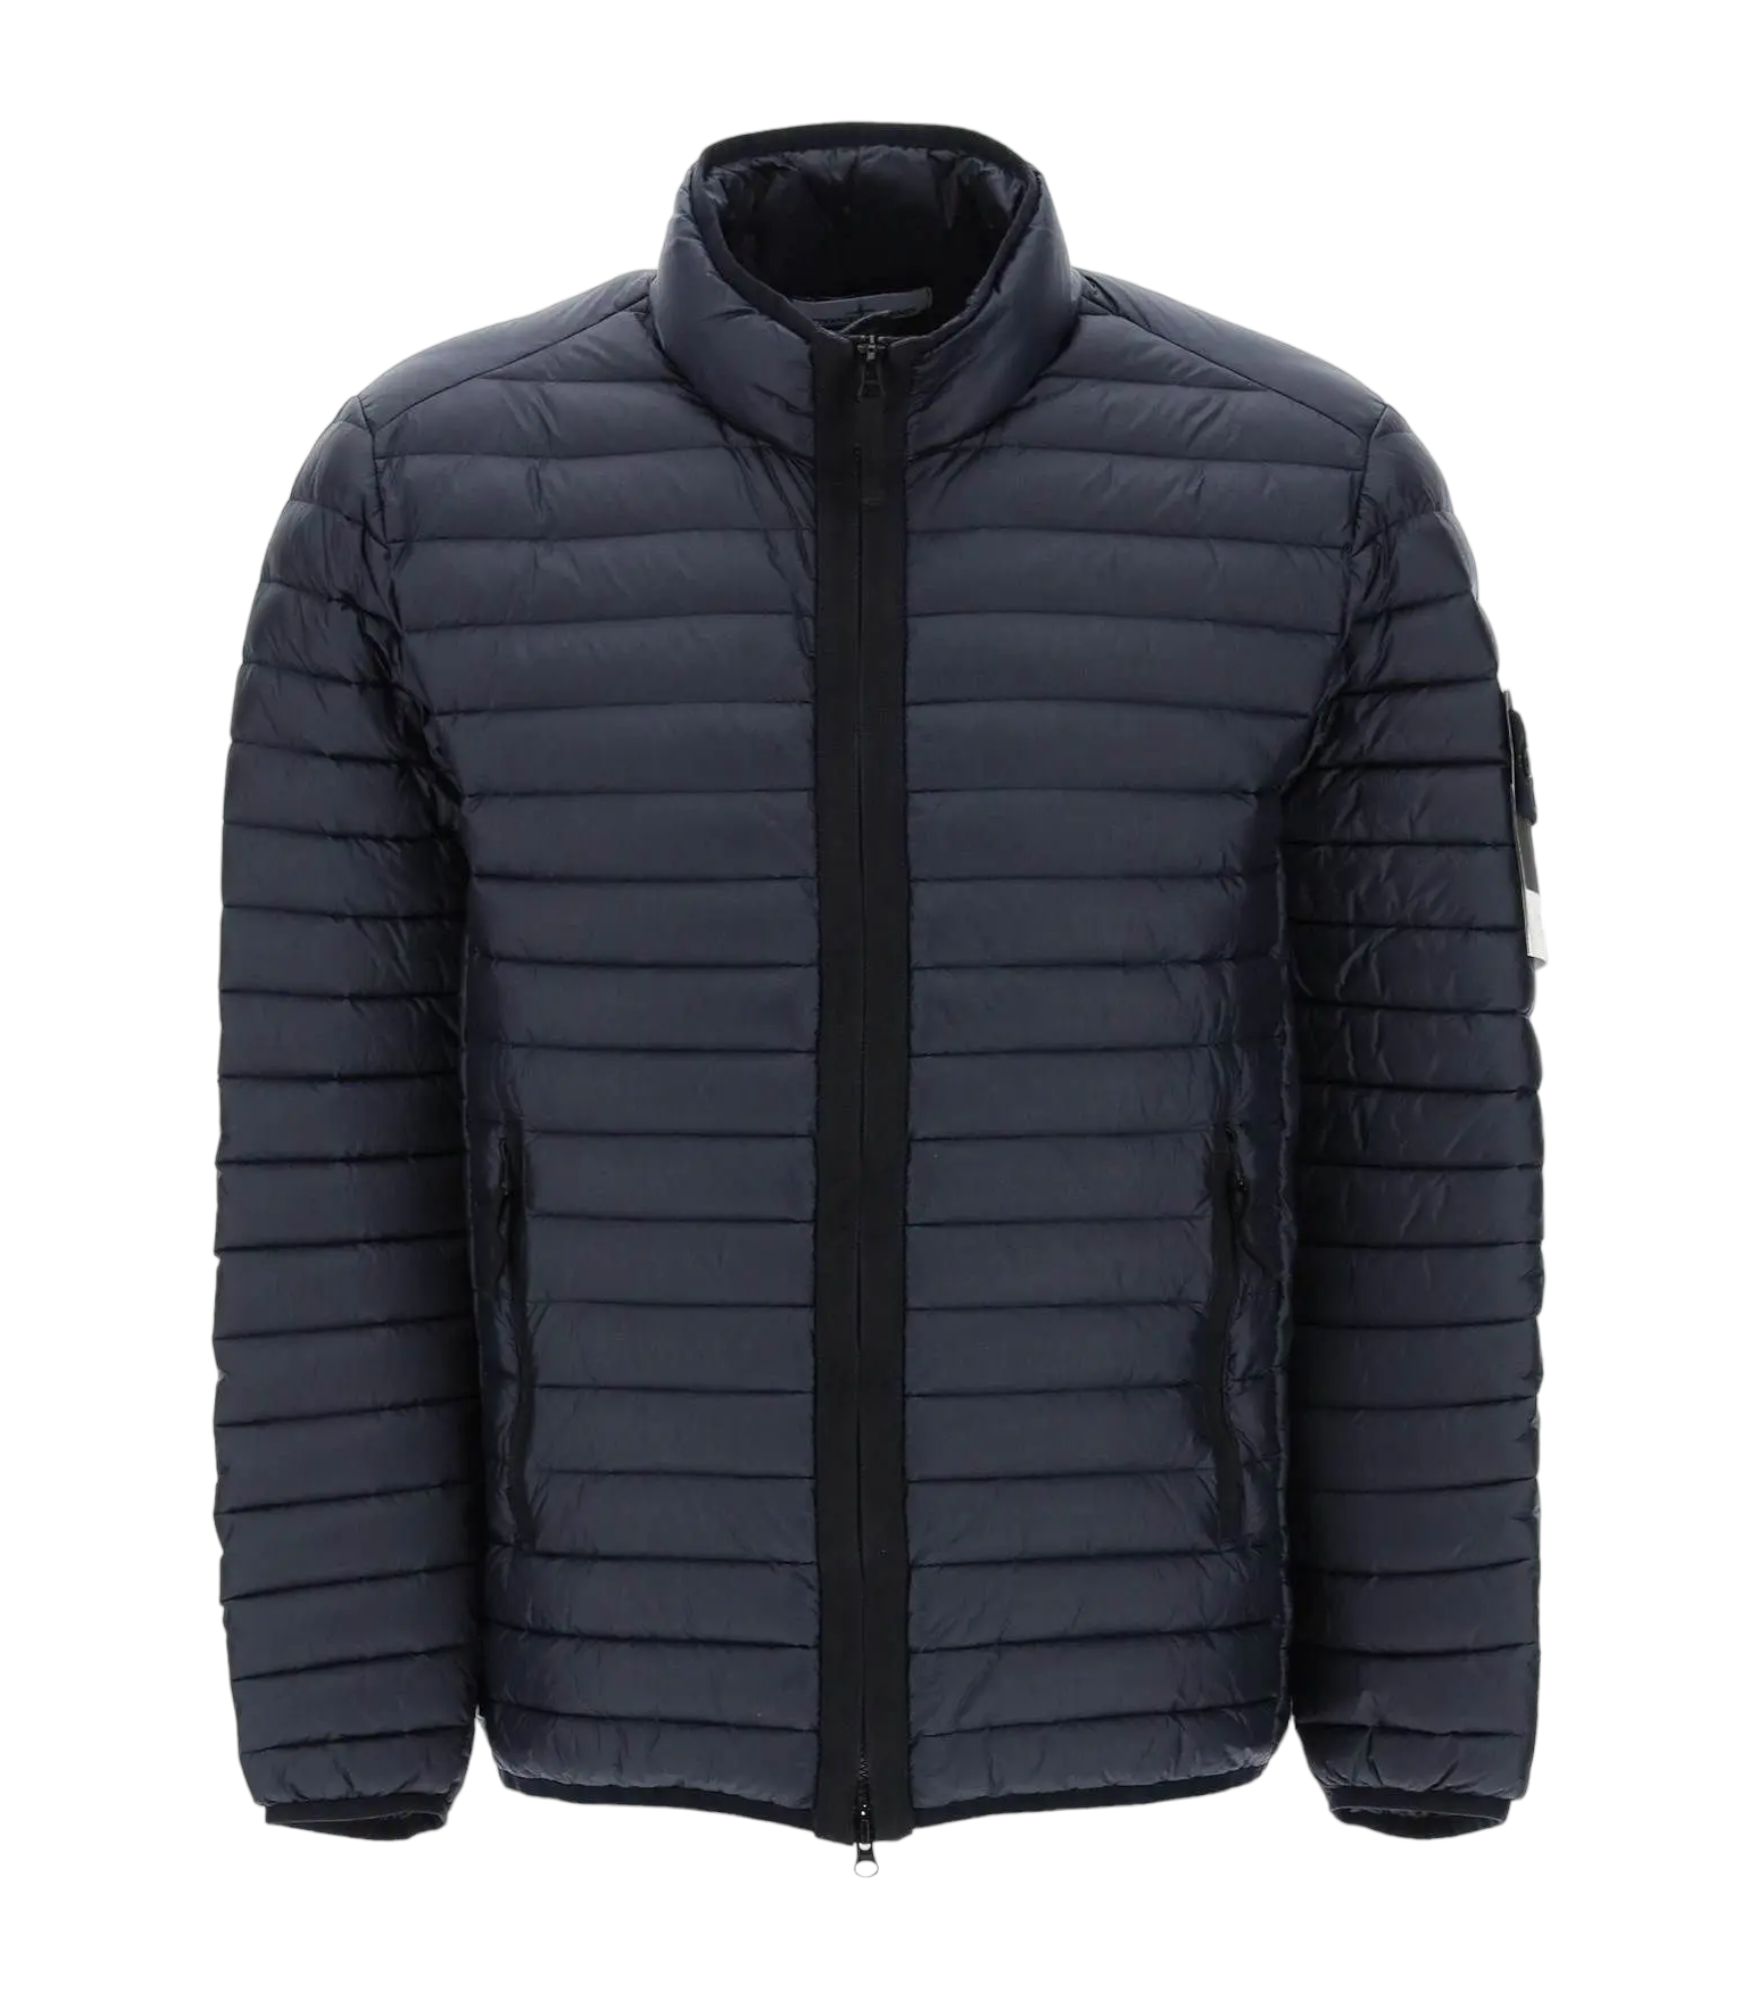 Stone Island Packable Down Jacket in Recycled Nylon Blue